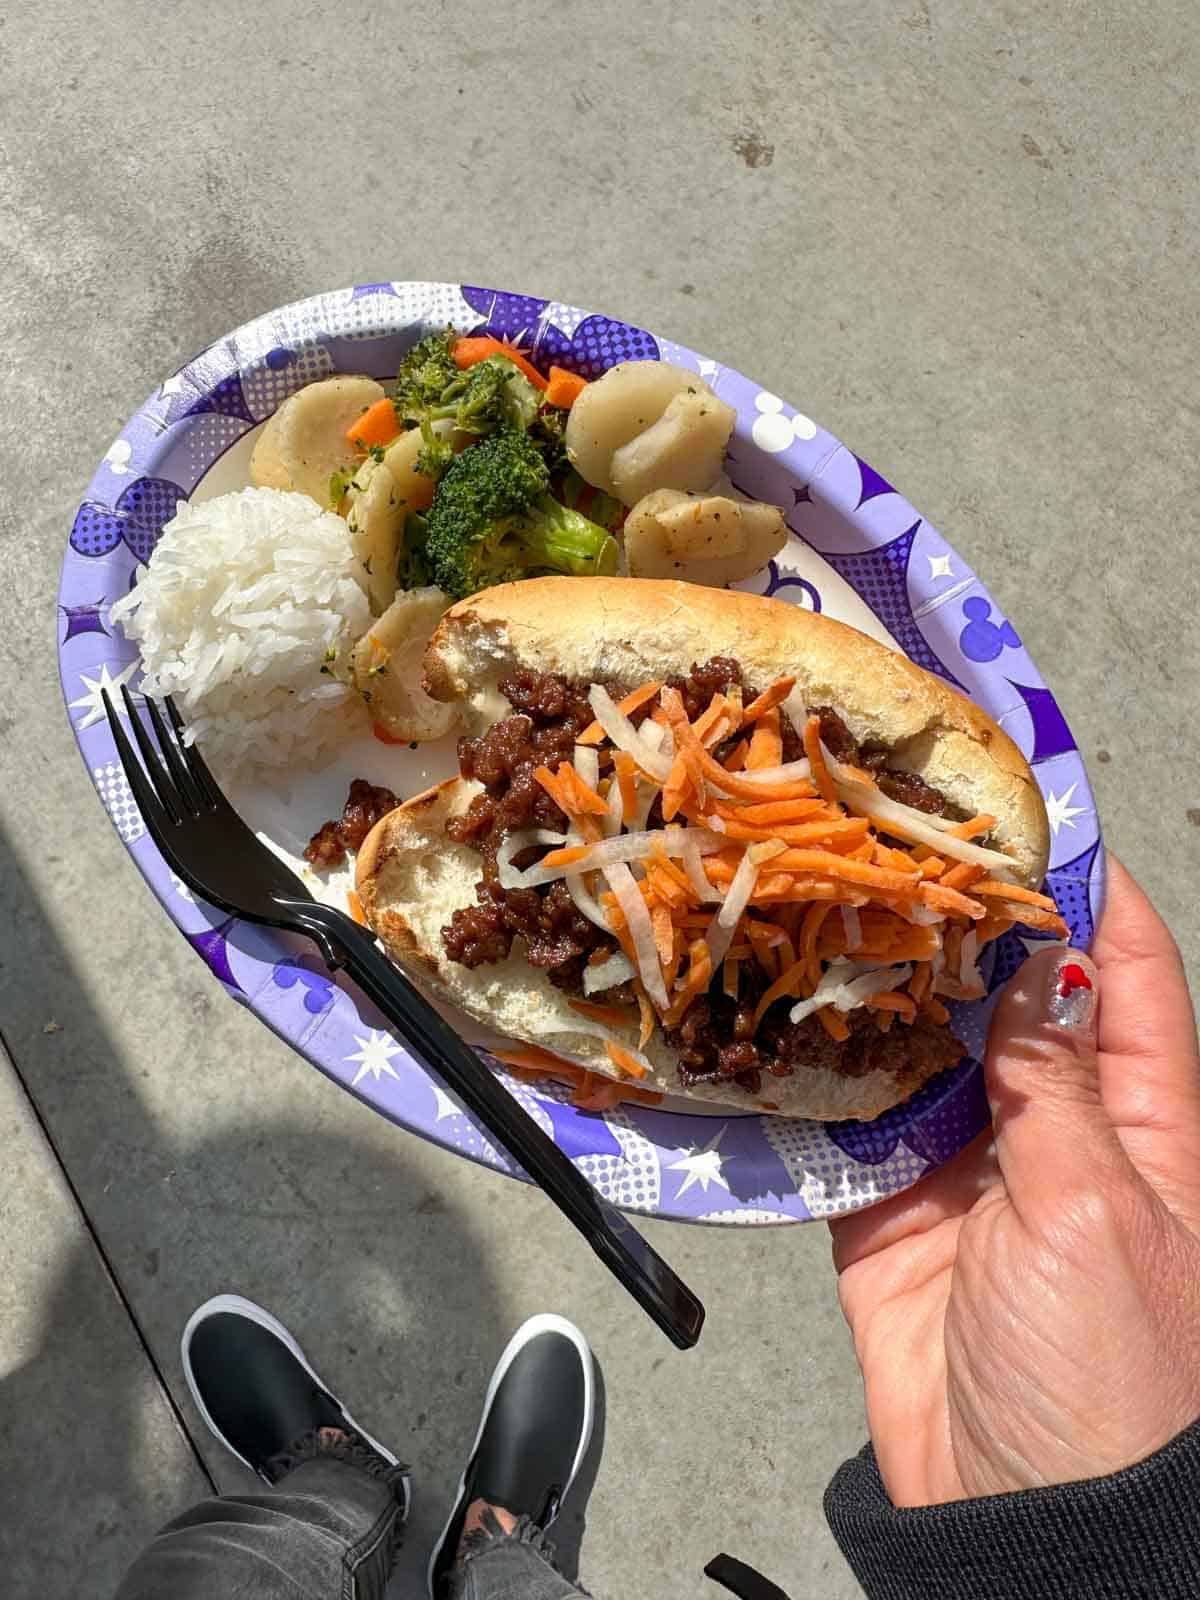 A hand holding a paper plate with a ground meat sandwich in a bun next to rice and vegetables.